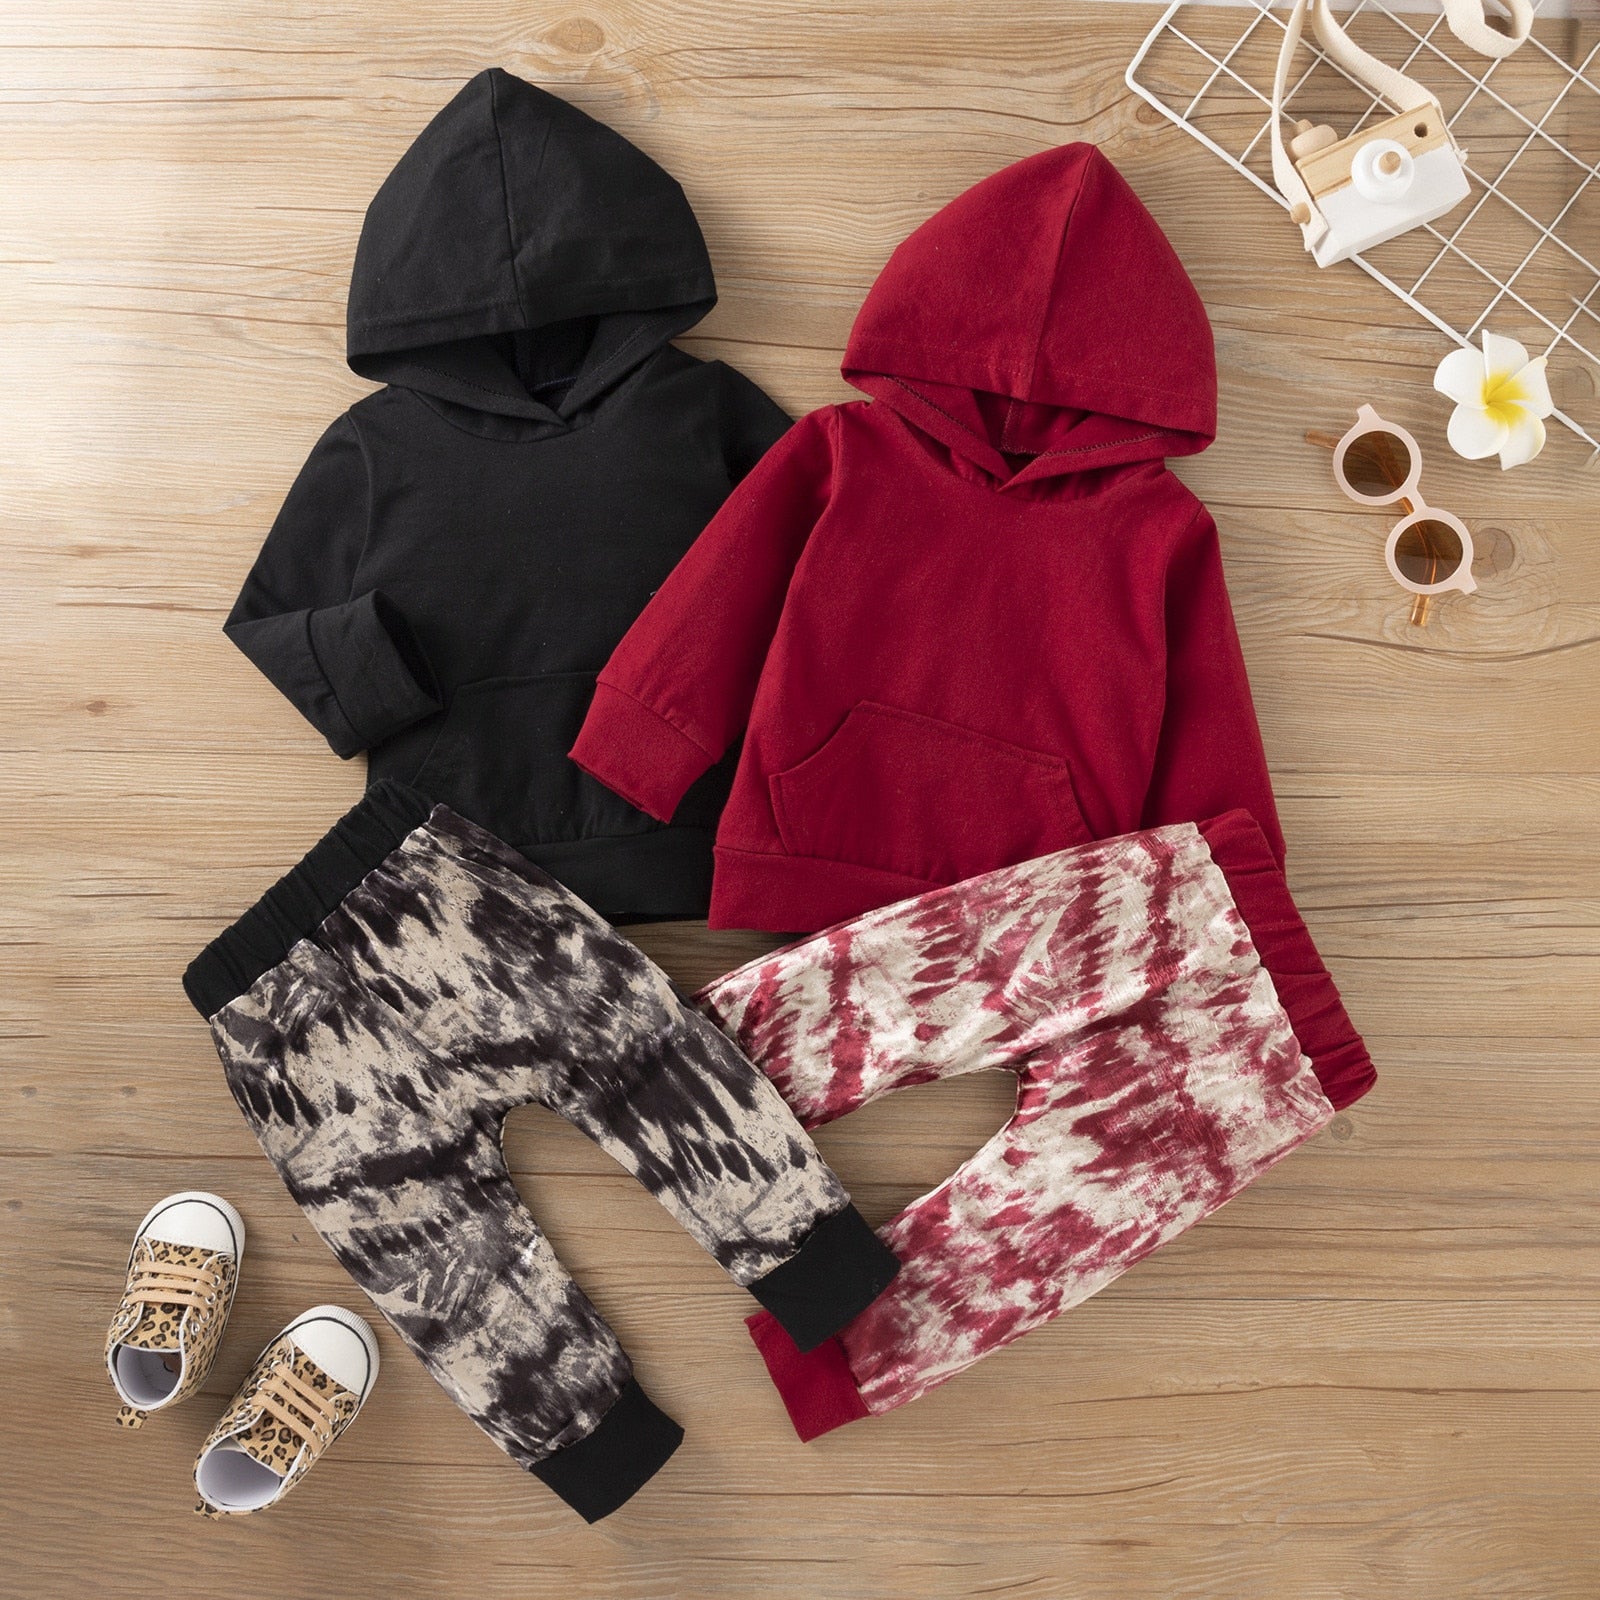 Winter Infant Unisex Clothing Set Solid Hooded Sweatshirt +Pants Infant Outfit